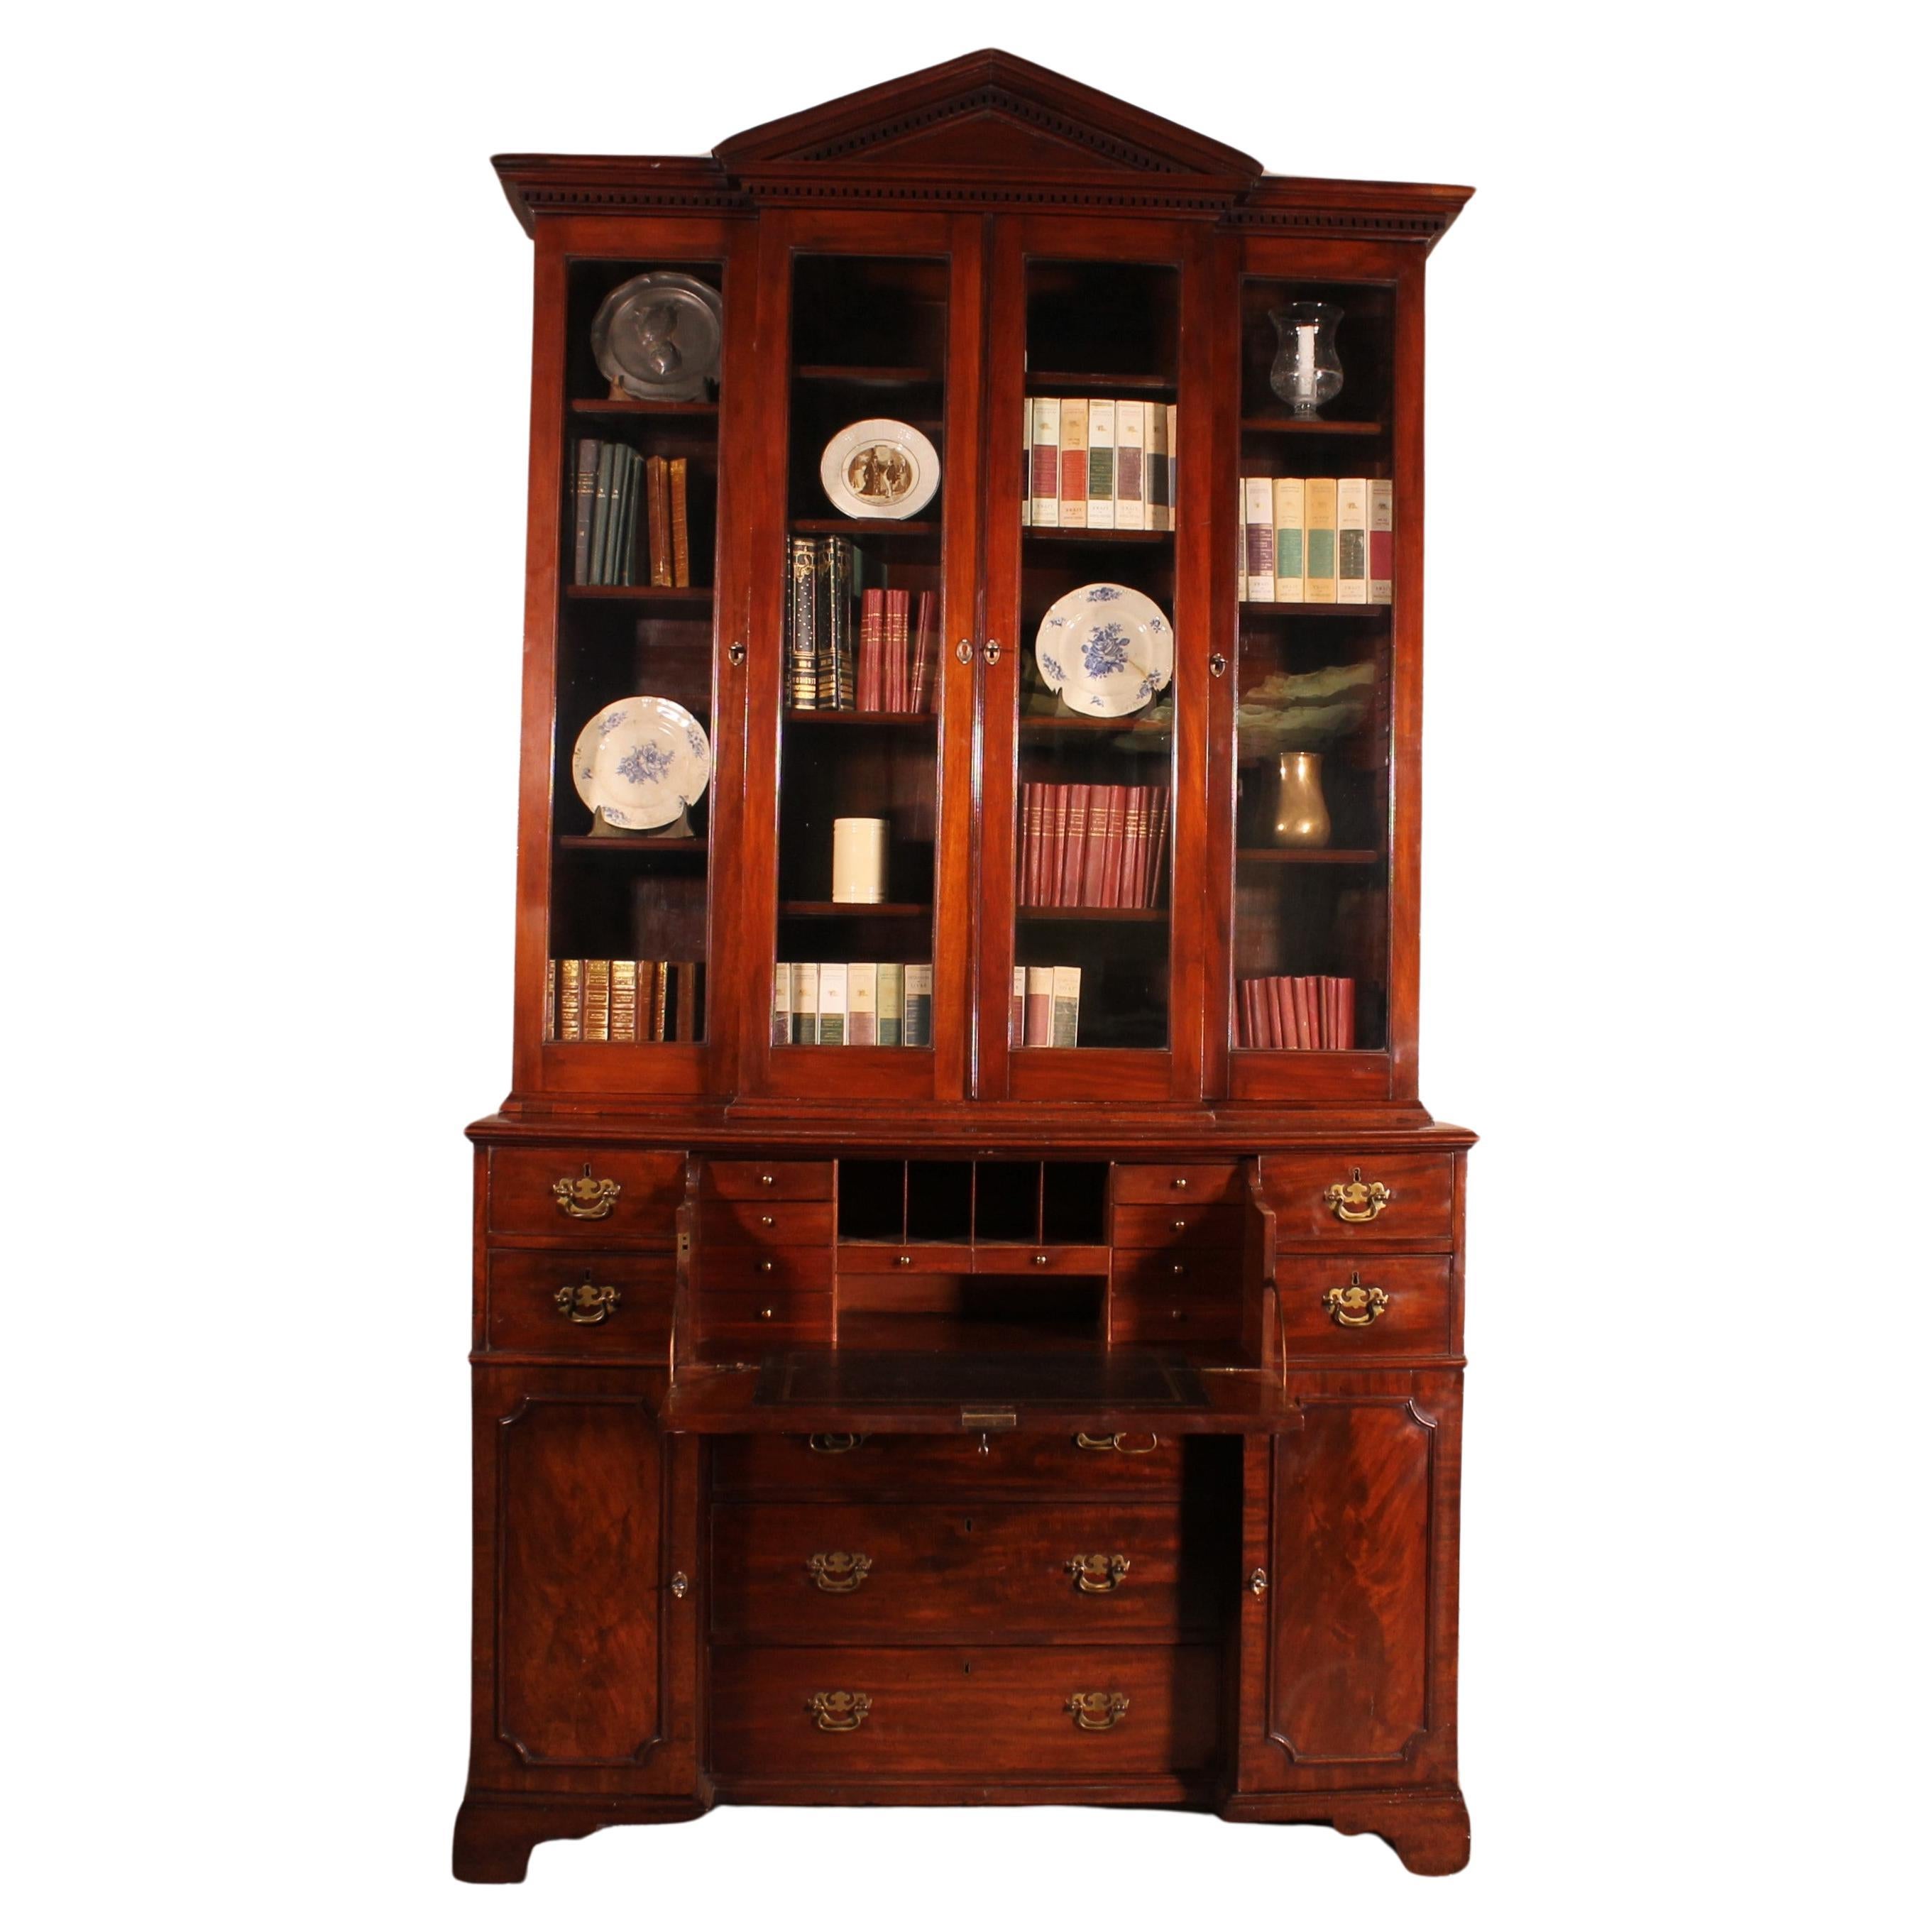 Mahogany Showcase Cabinet Or Library From The 18th Century